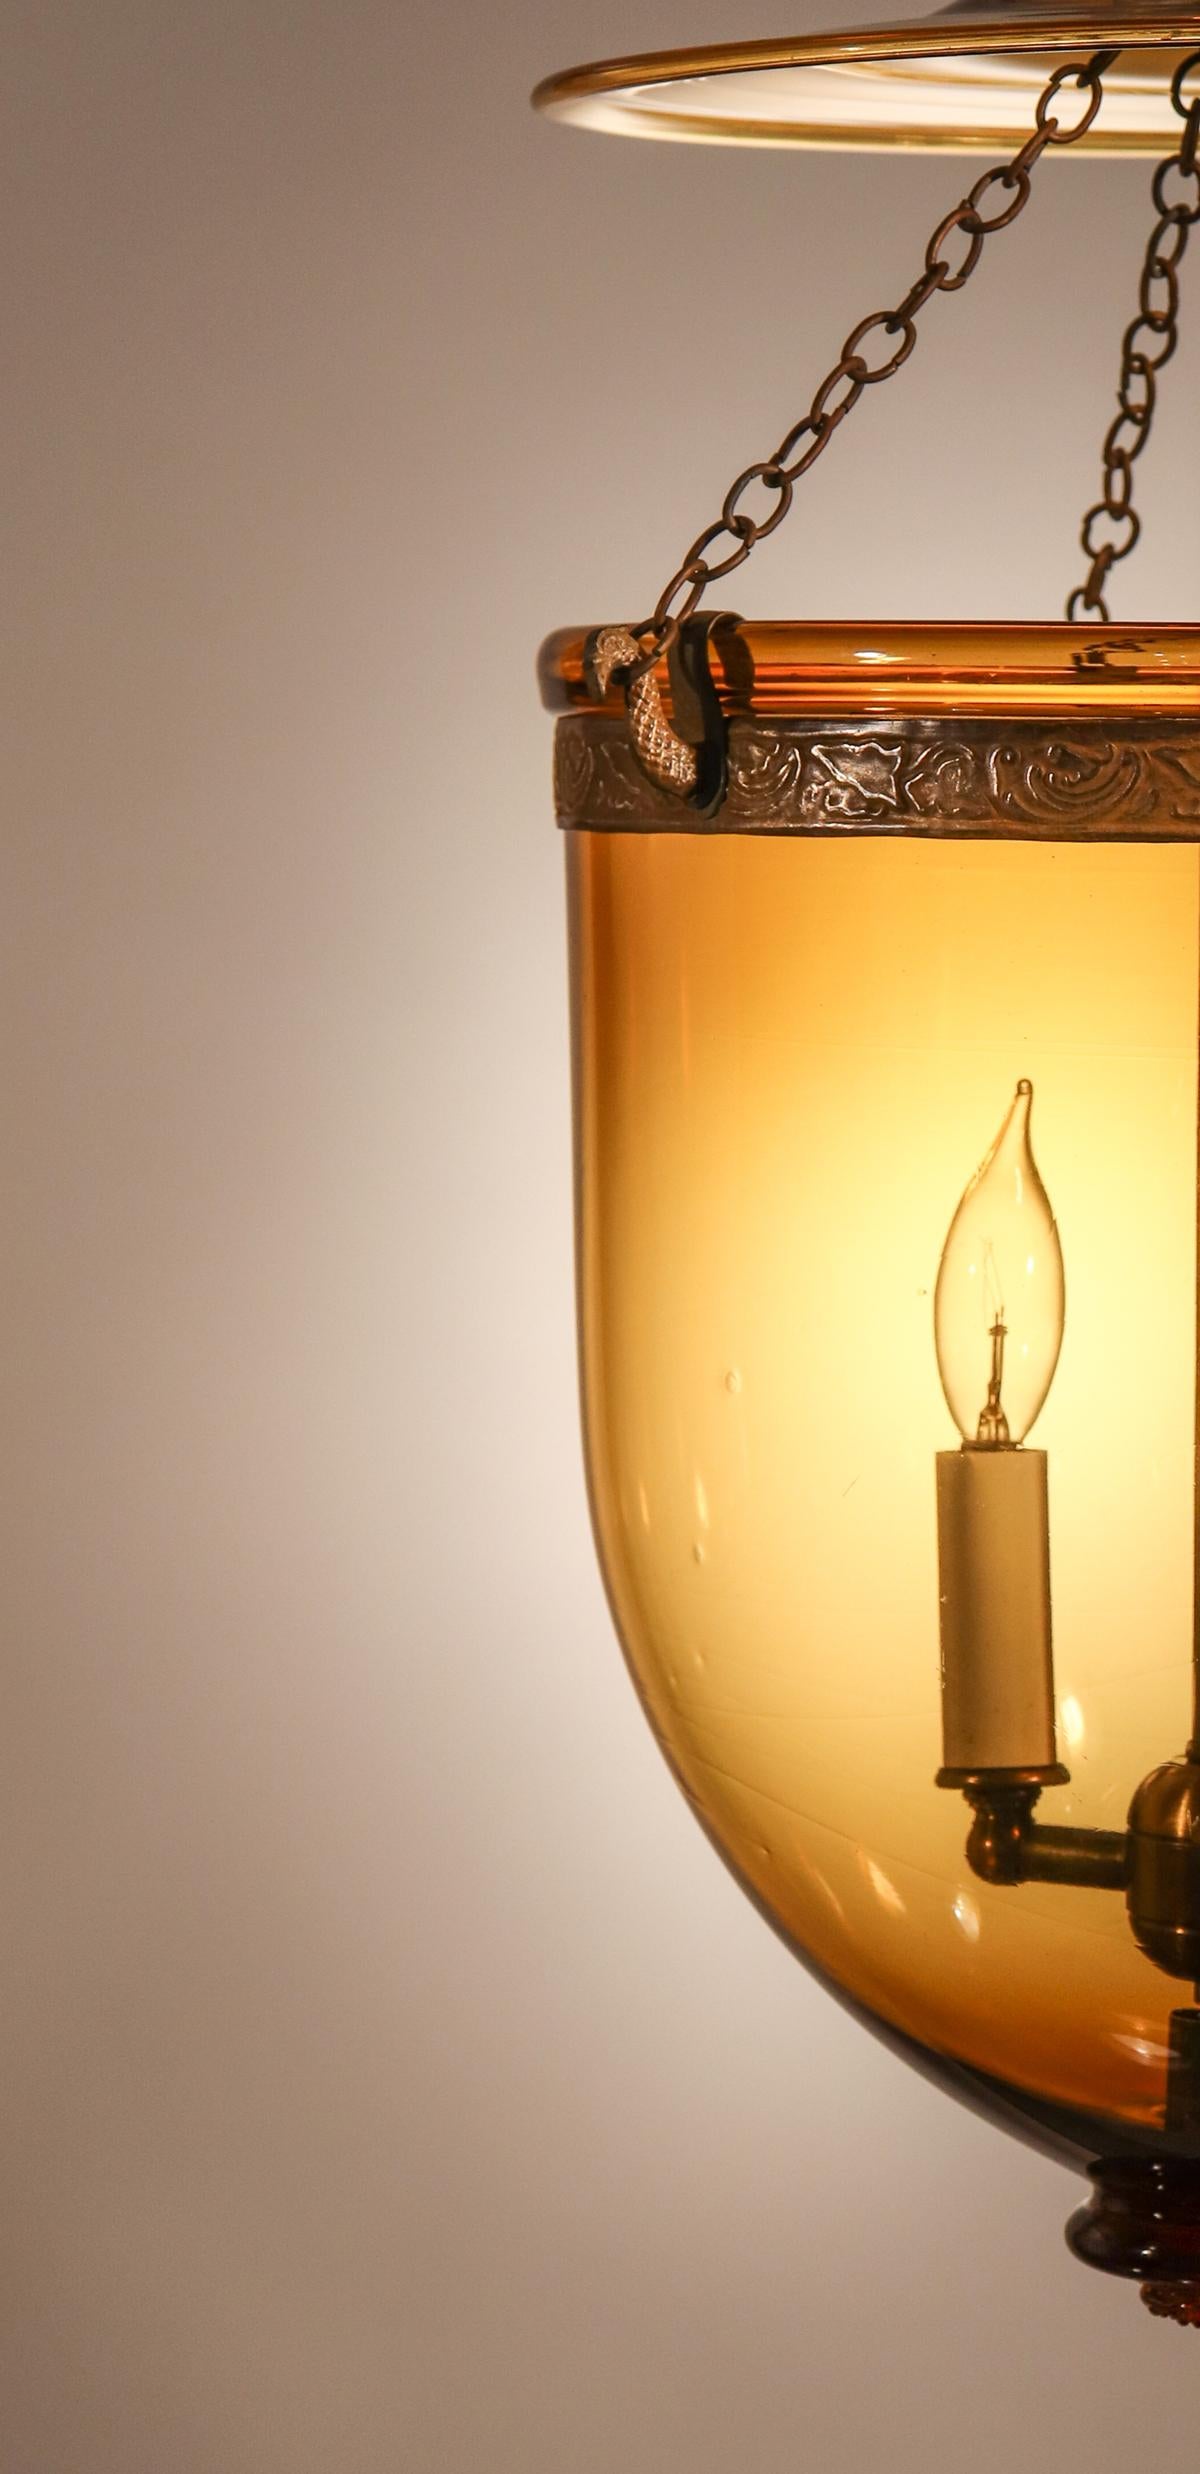 English Antique Bell Jar Lantern with Amber Colored Glass